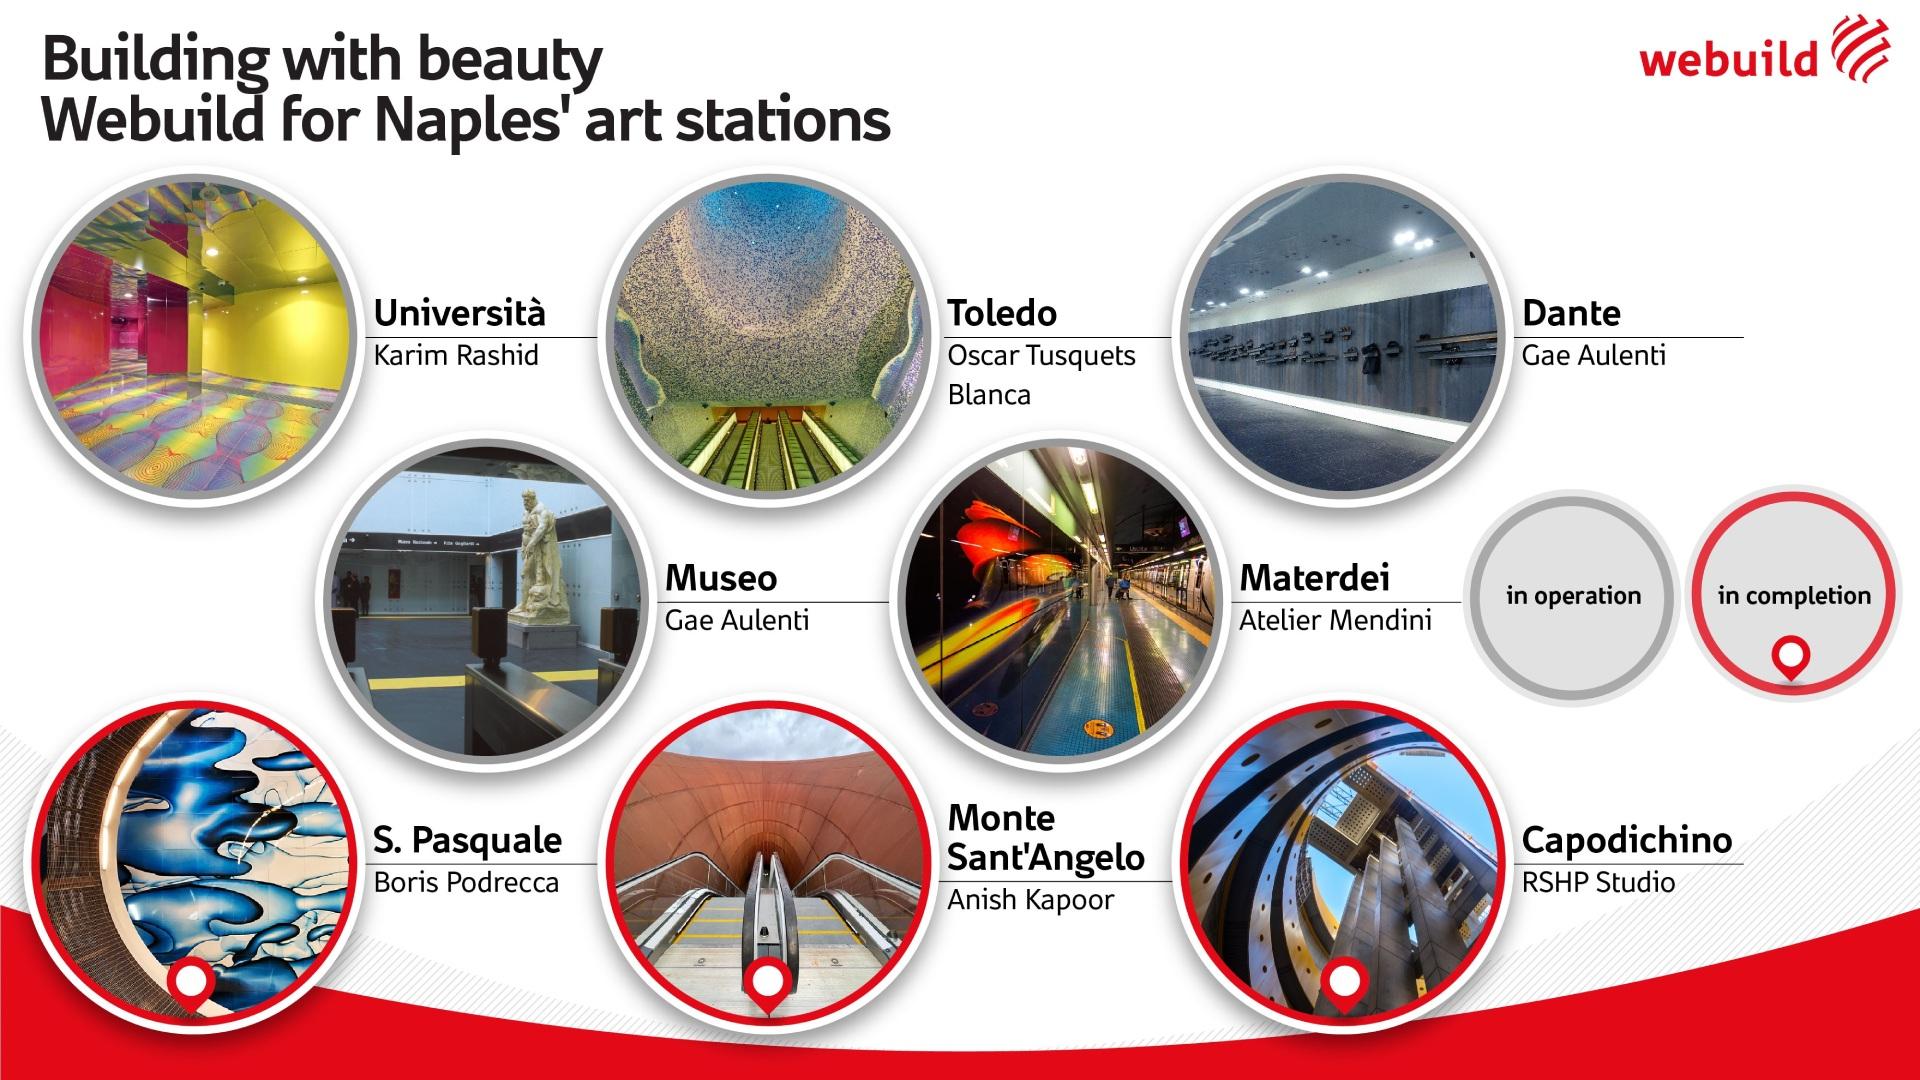 Building with beauty. Webuild for Naples' art stations